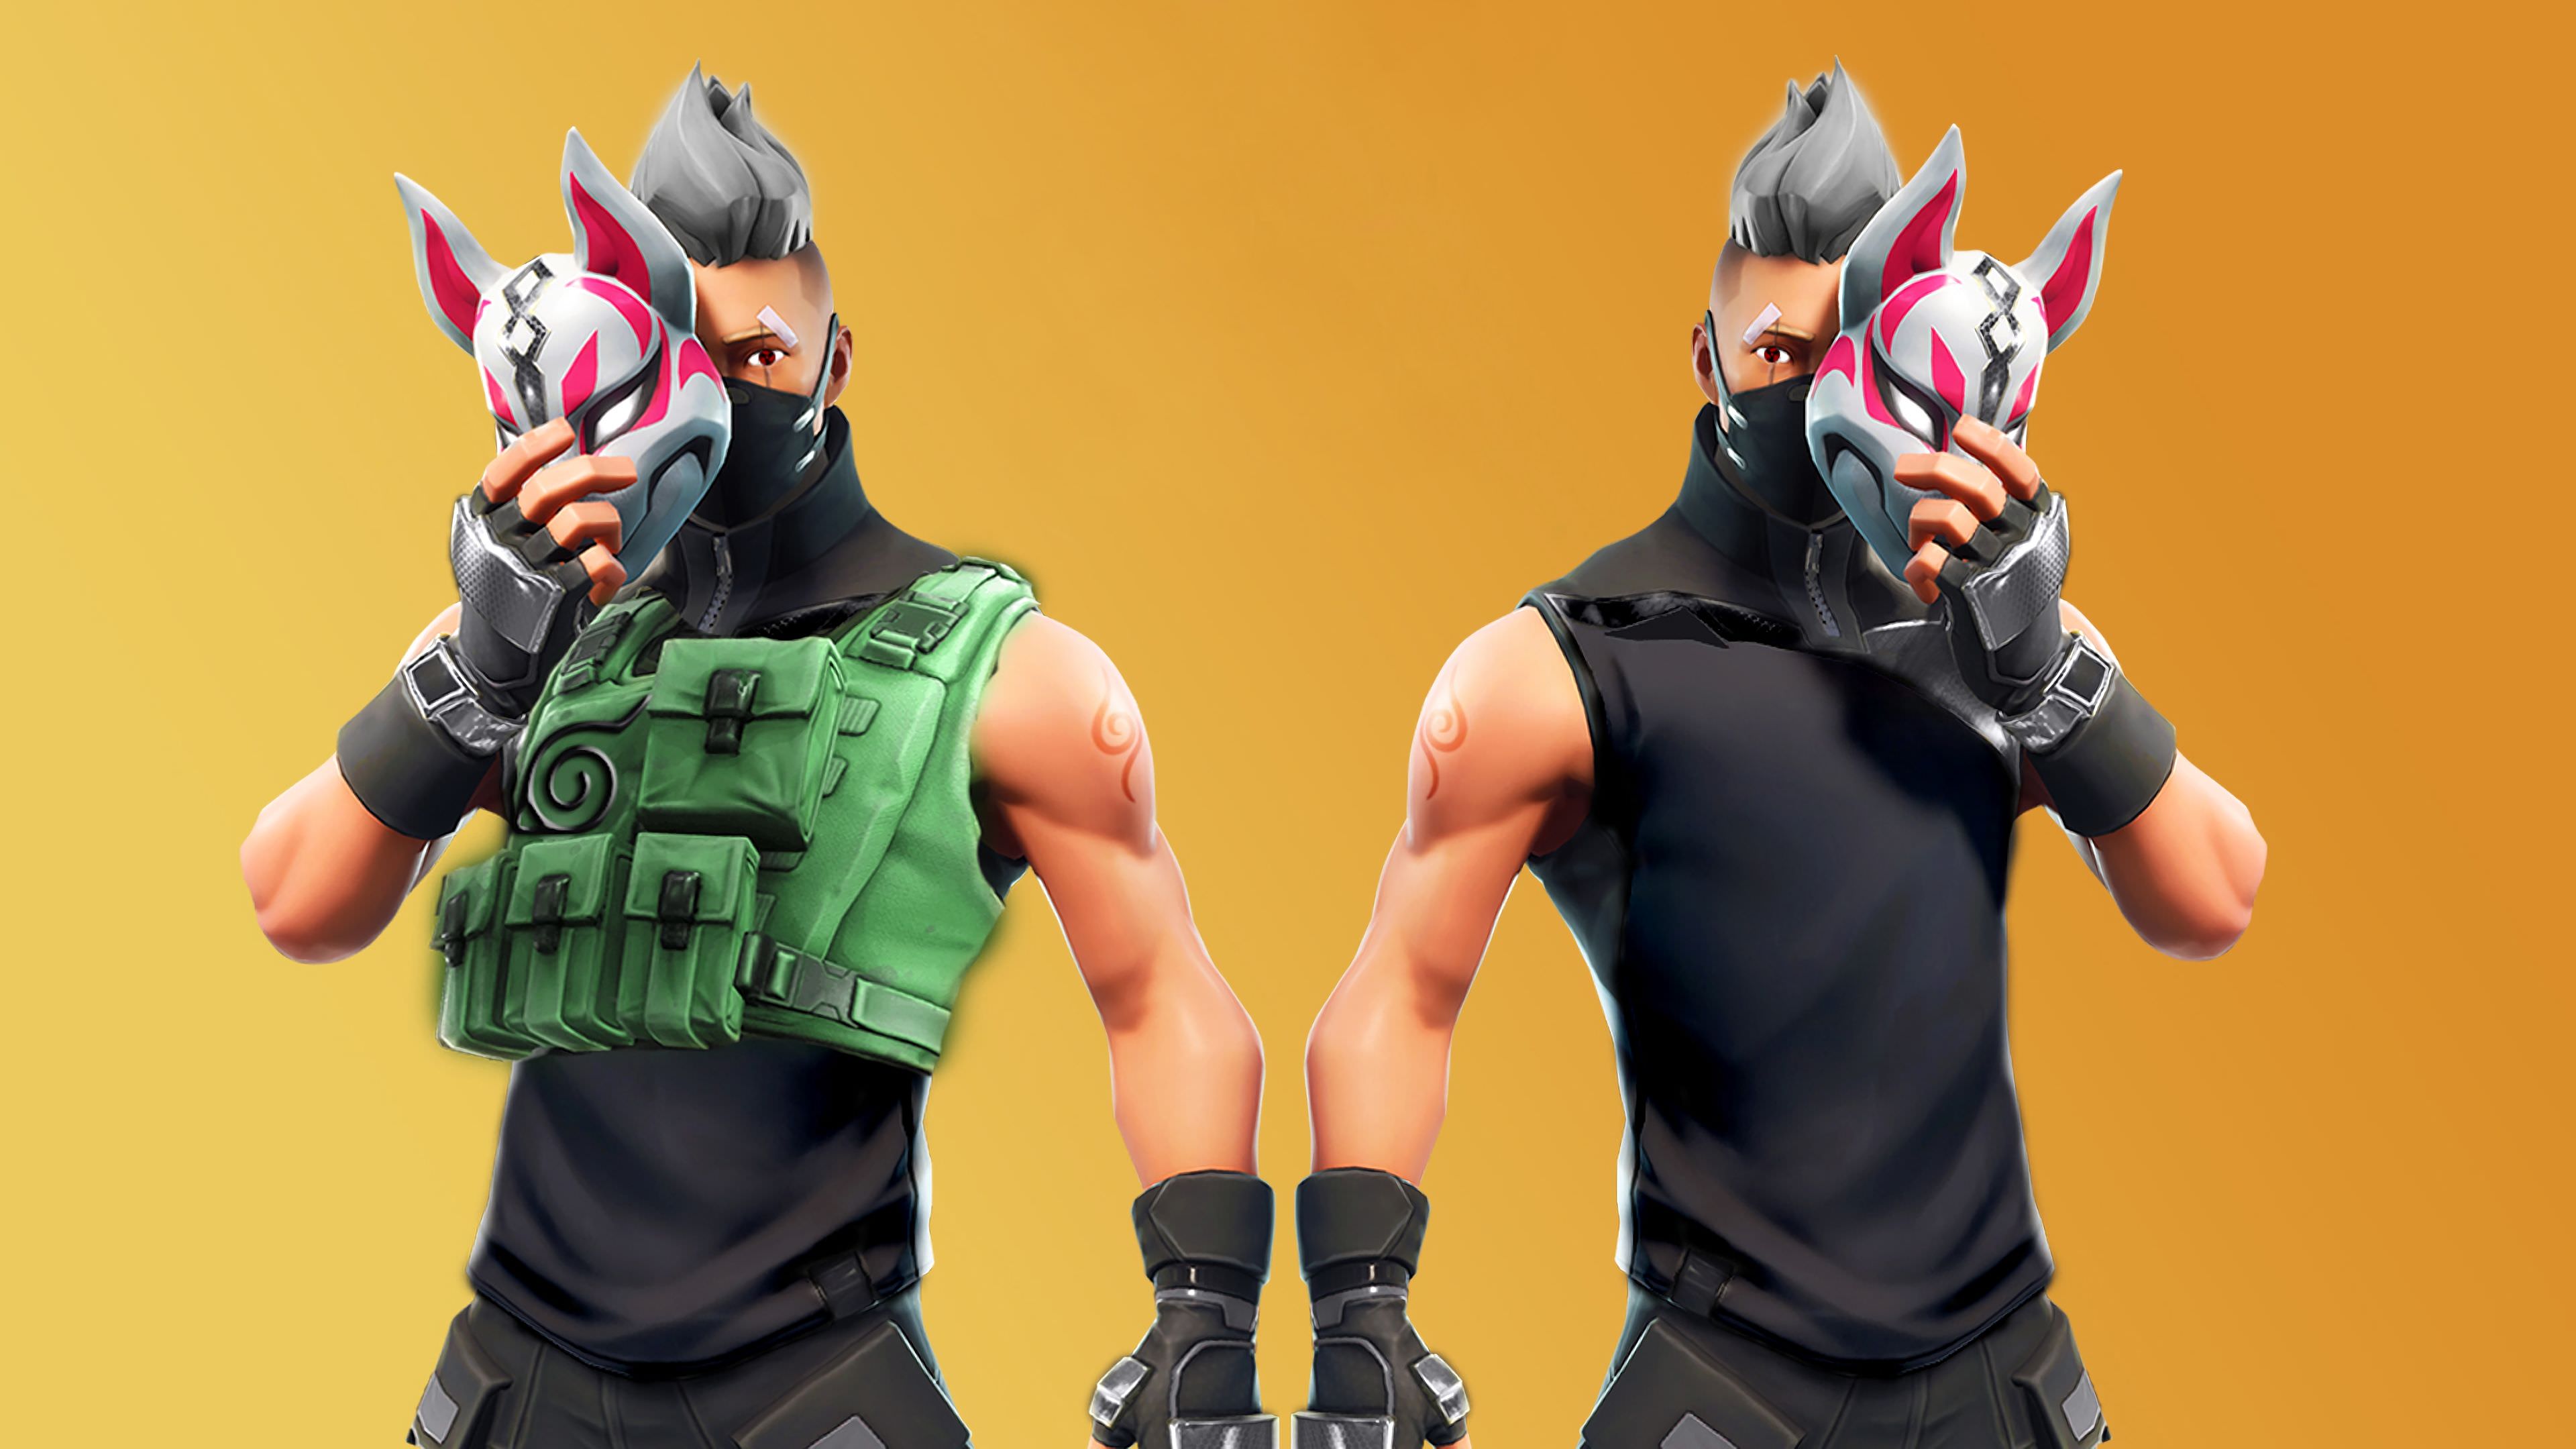 Two Fortnite characters with masks on a yellow background - Fortnite